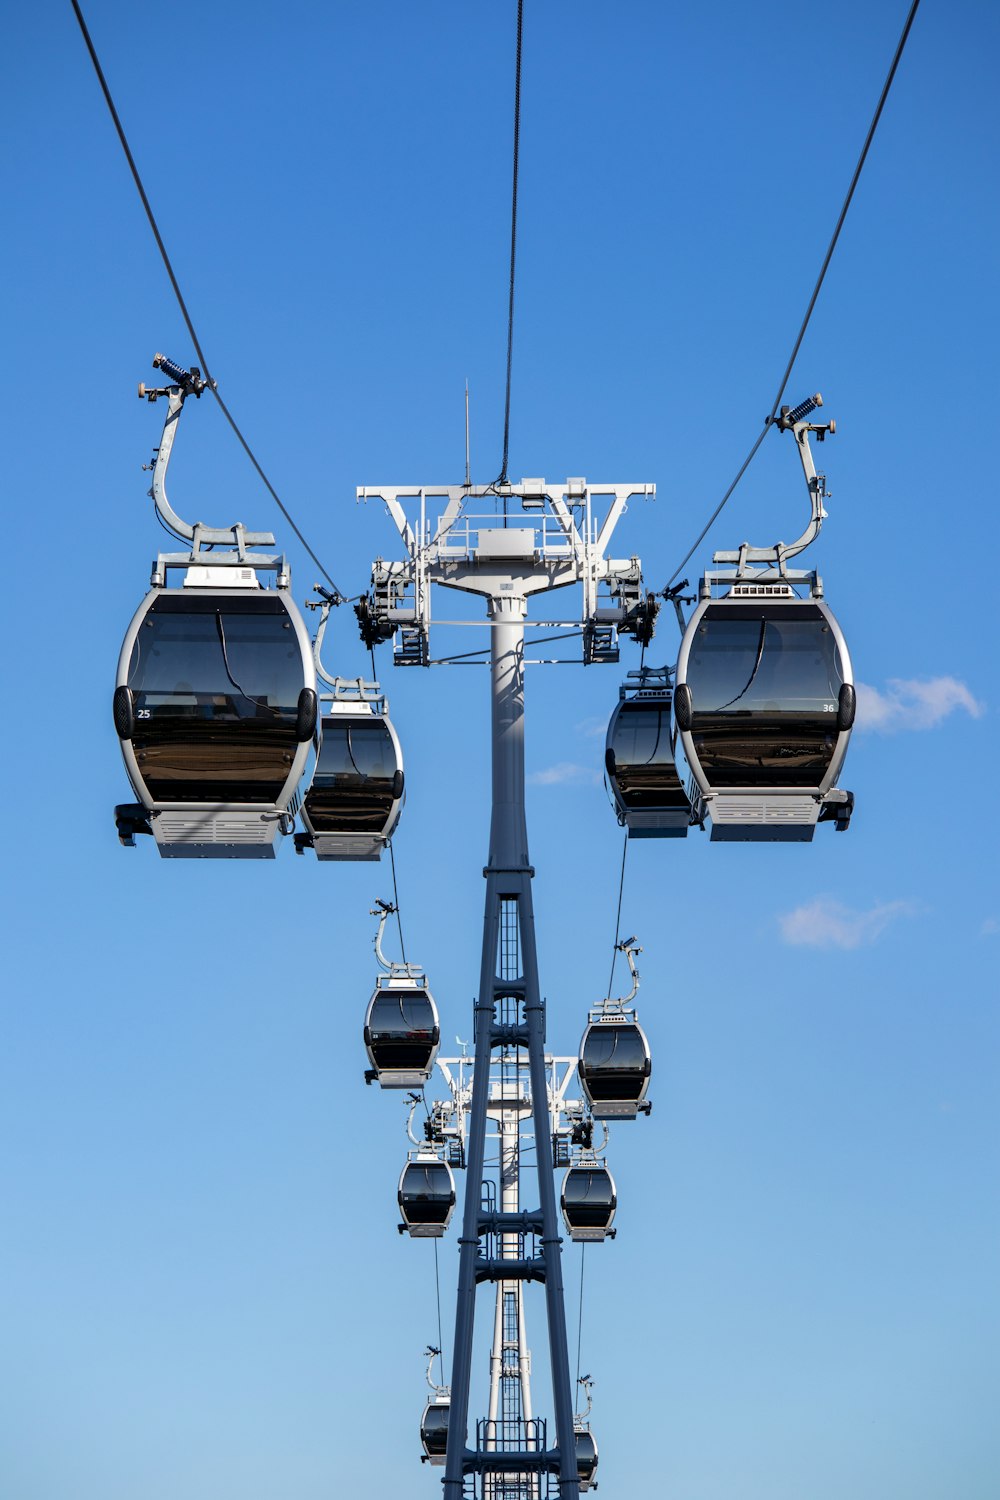 a view of a gondola going up a hill